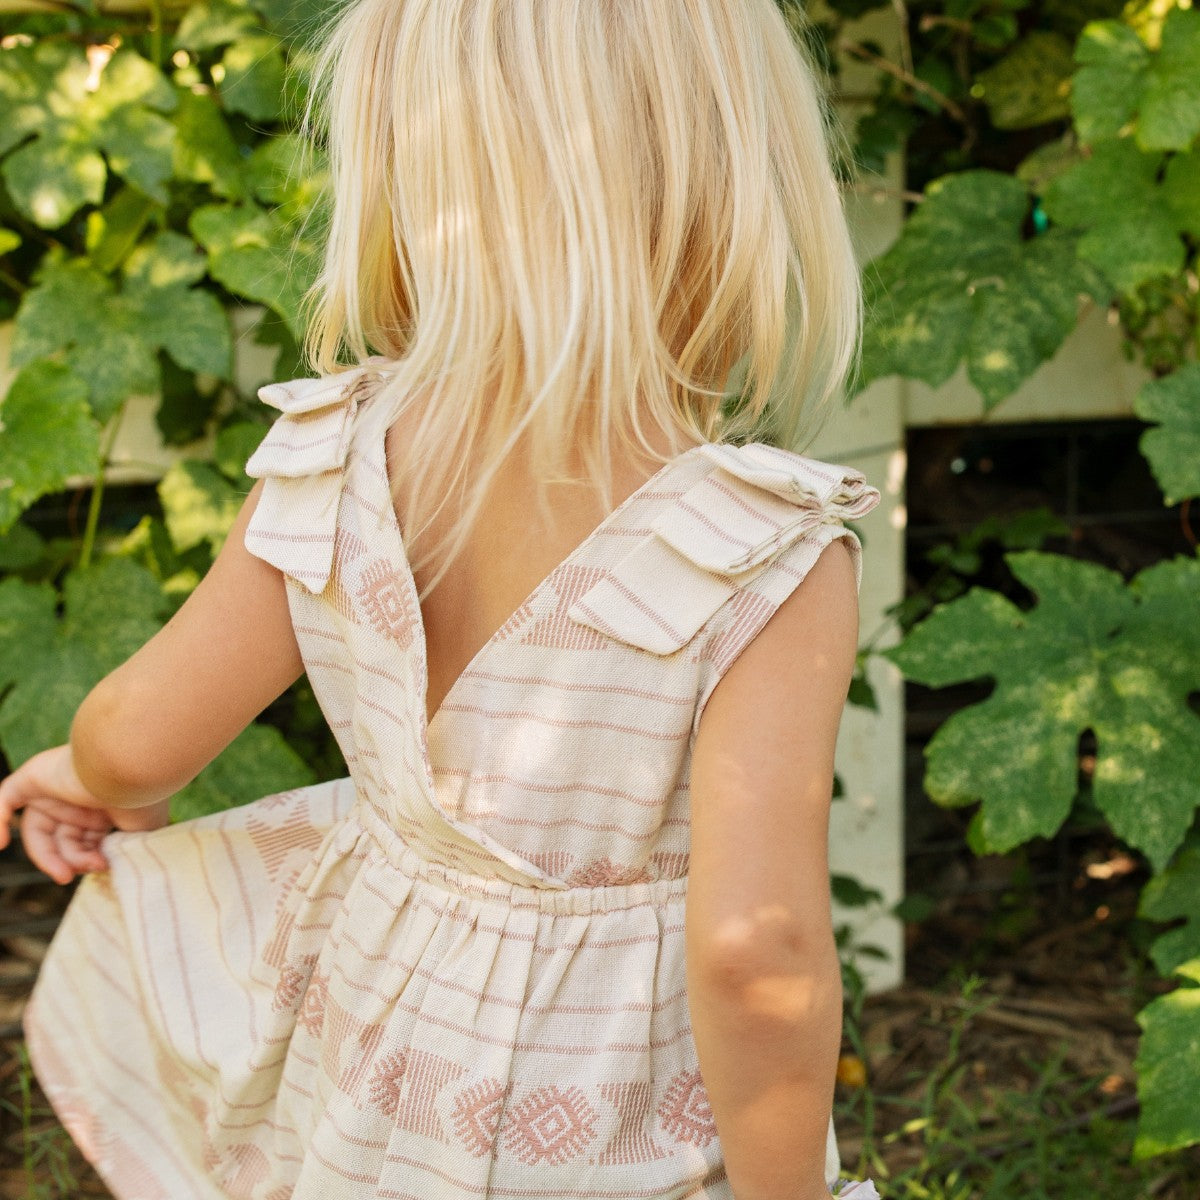 Mini Agnes Pinafore Set in Dust Pink Embroidery by Folklore Las Ninas